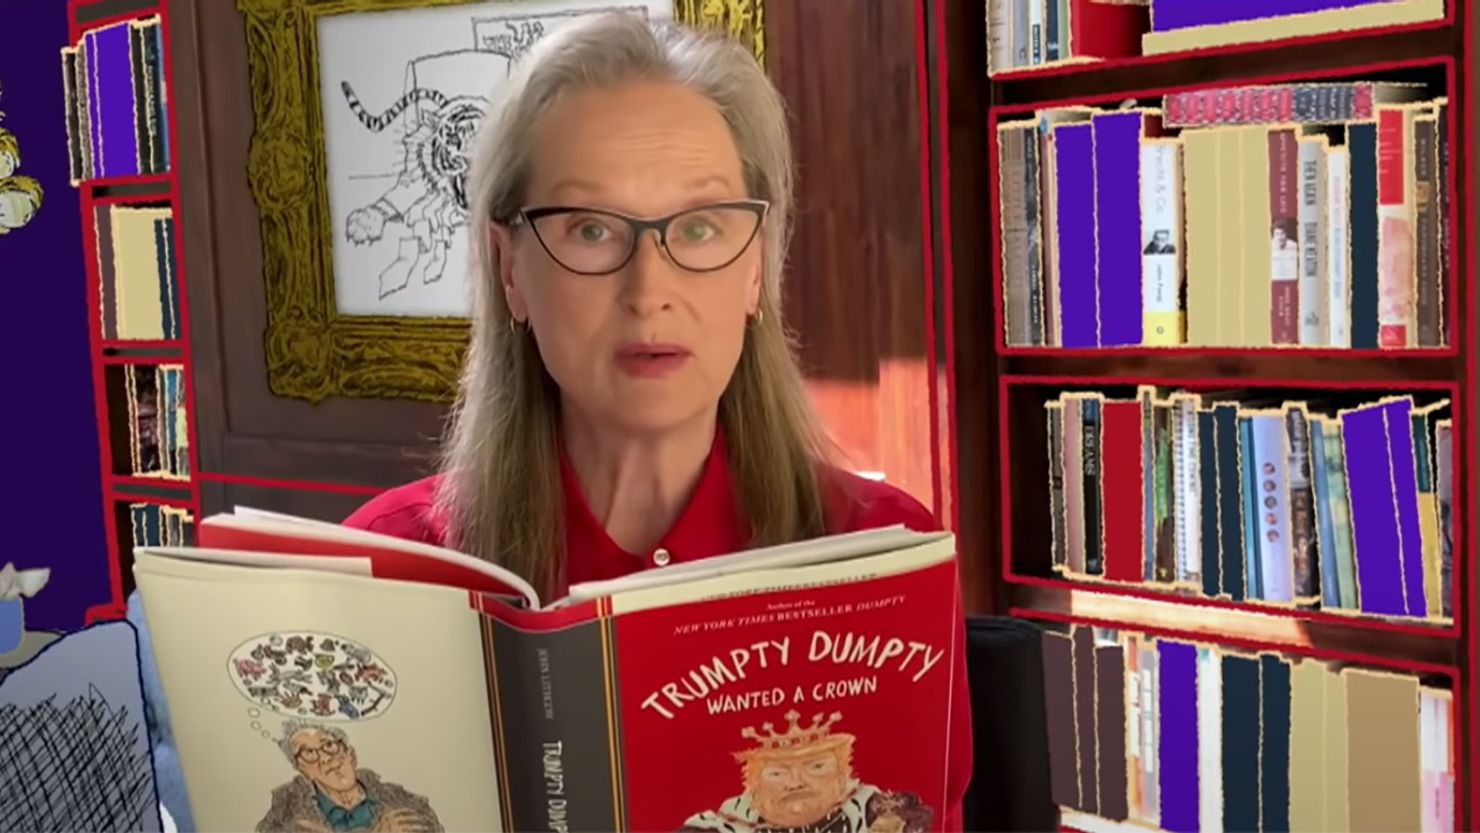 Meryl Streep reads from John Lithgow's "Trumpty Dumpty" book on The Late Show with Stephen Colbert on September 30, 2020.